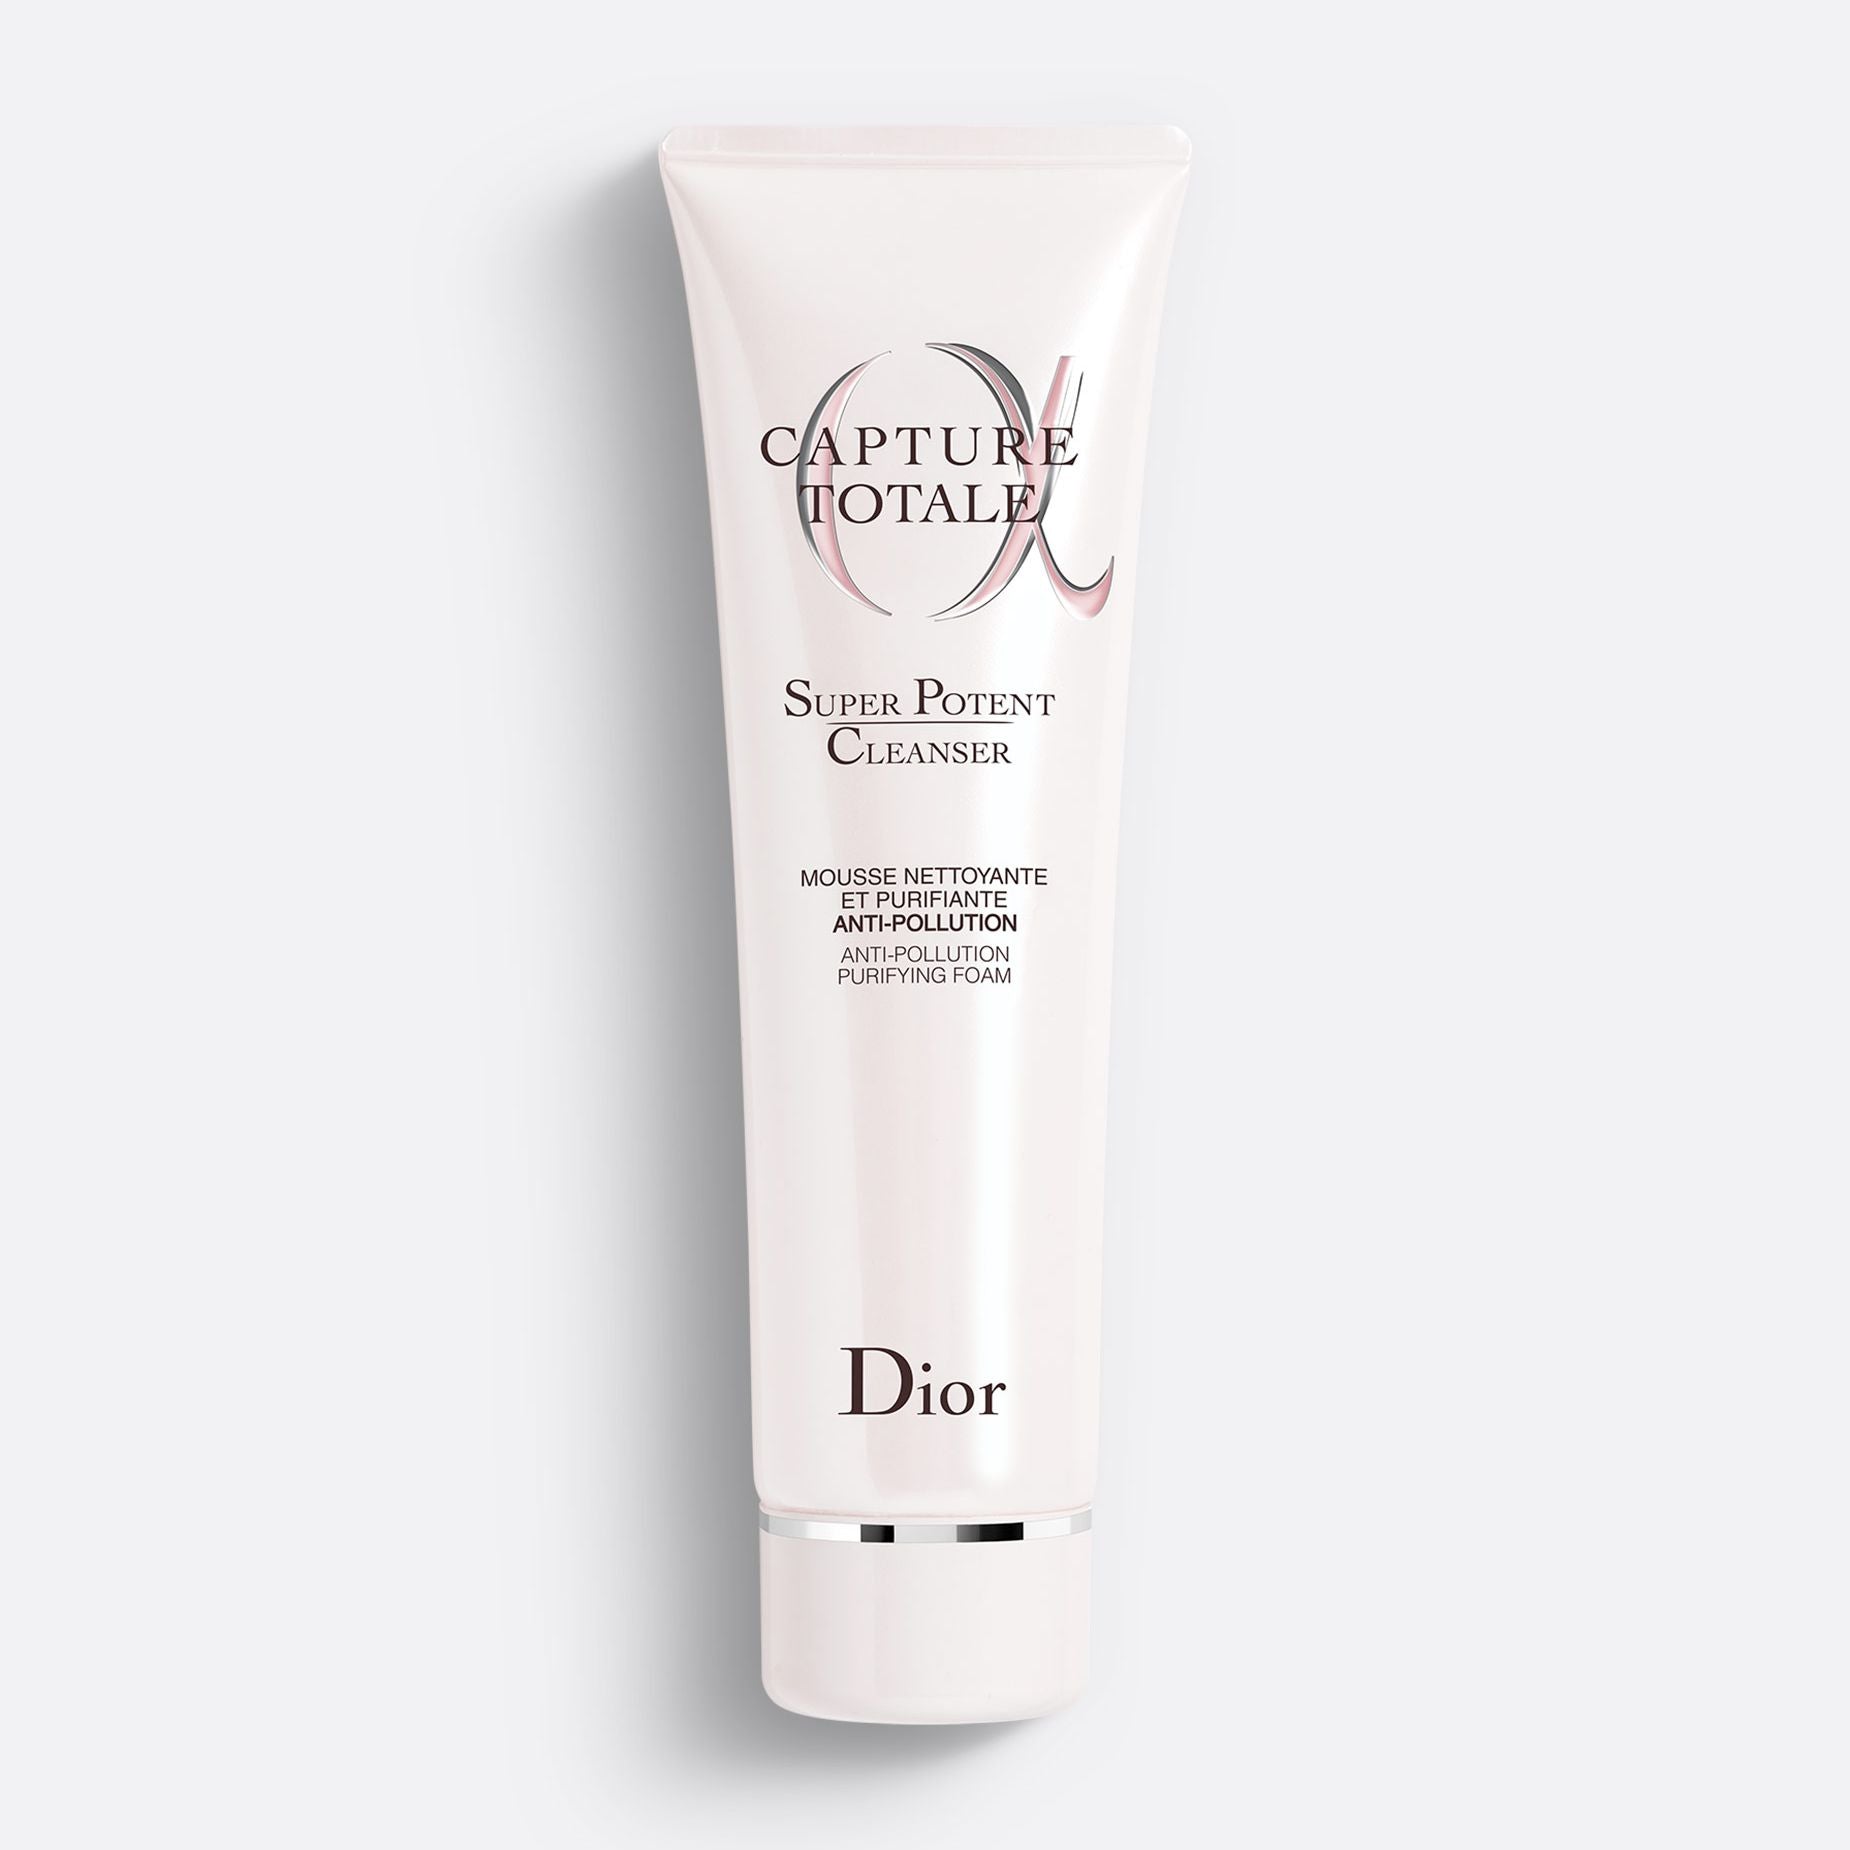 CAPTURE TOTALE SUPER POTENT CLEANSER ~ Face Cleanser - Anti-Pollution Purifying Foam